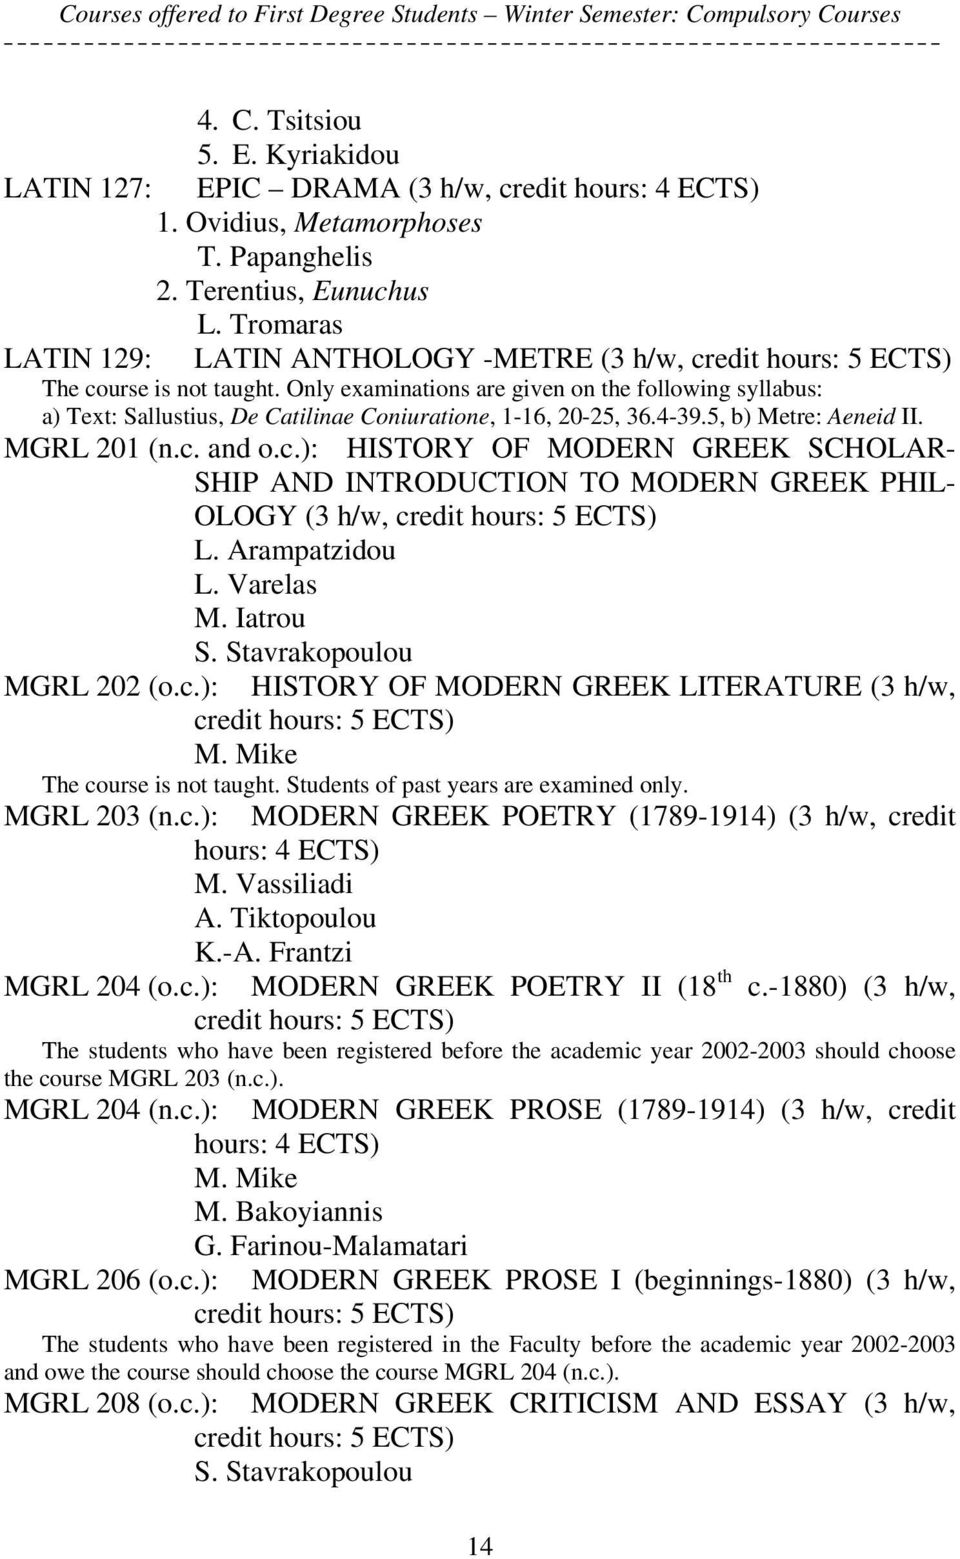 Only examinations are given on the following syllabus: a) Text: Sallustius, De Catilinae Coniuratione, 1-16, 20-25, 36.4-39.5, b) Metre: Aeneid II. MGRL 201 (n.c.